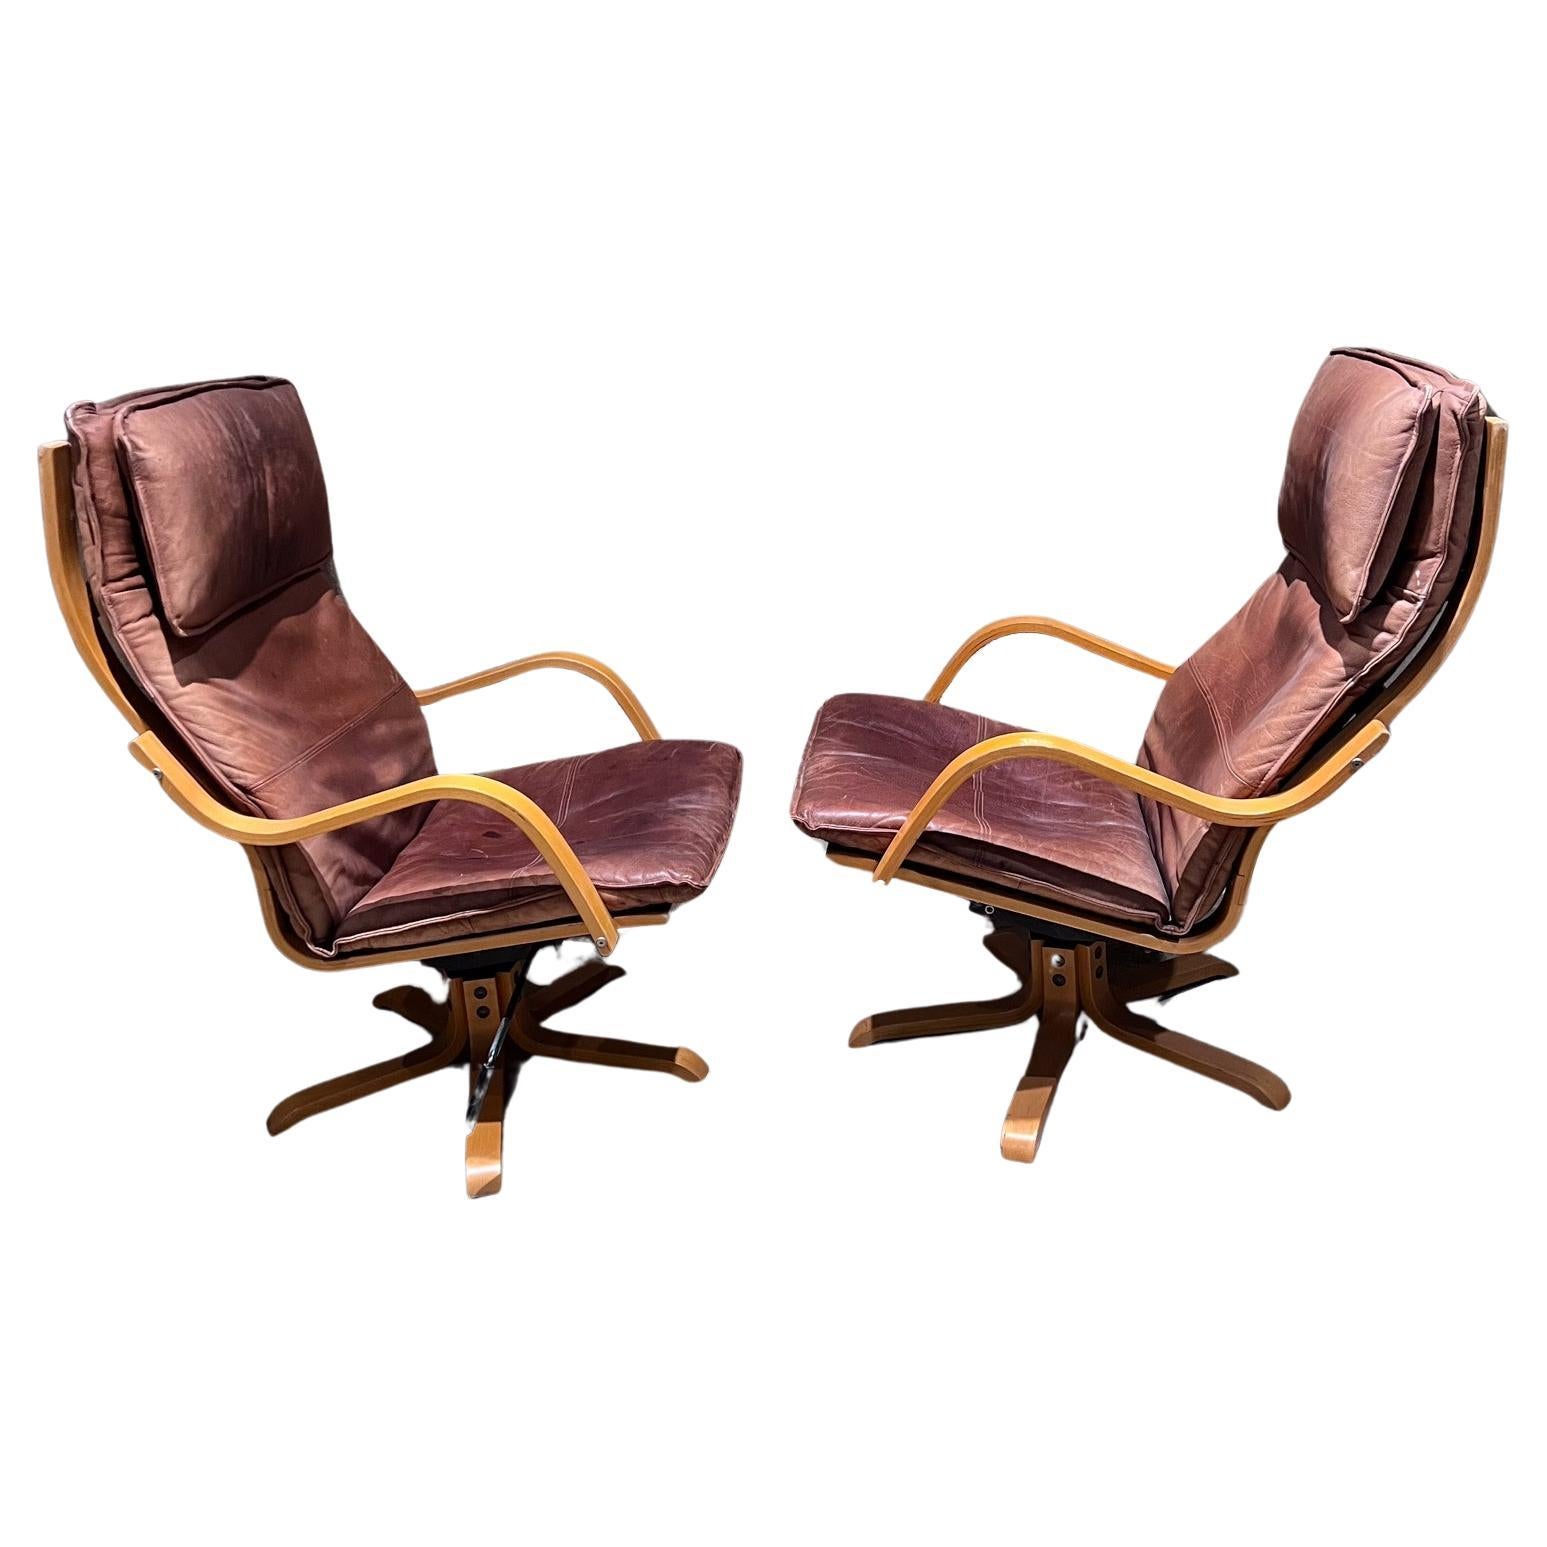 1960s Italian Swiss Leather Tall Padded Lounge Chairs For Sale